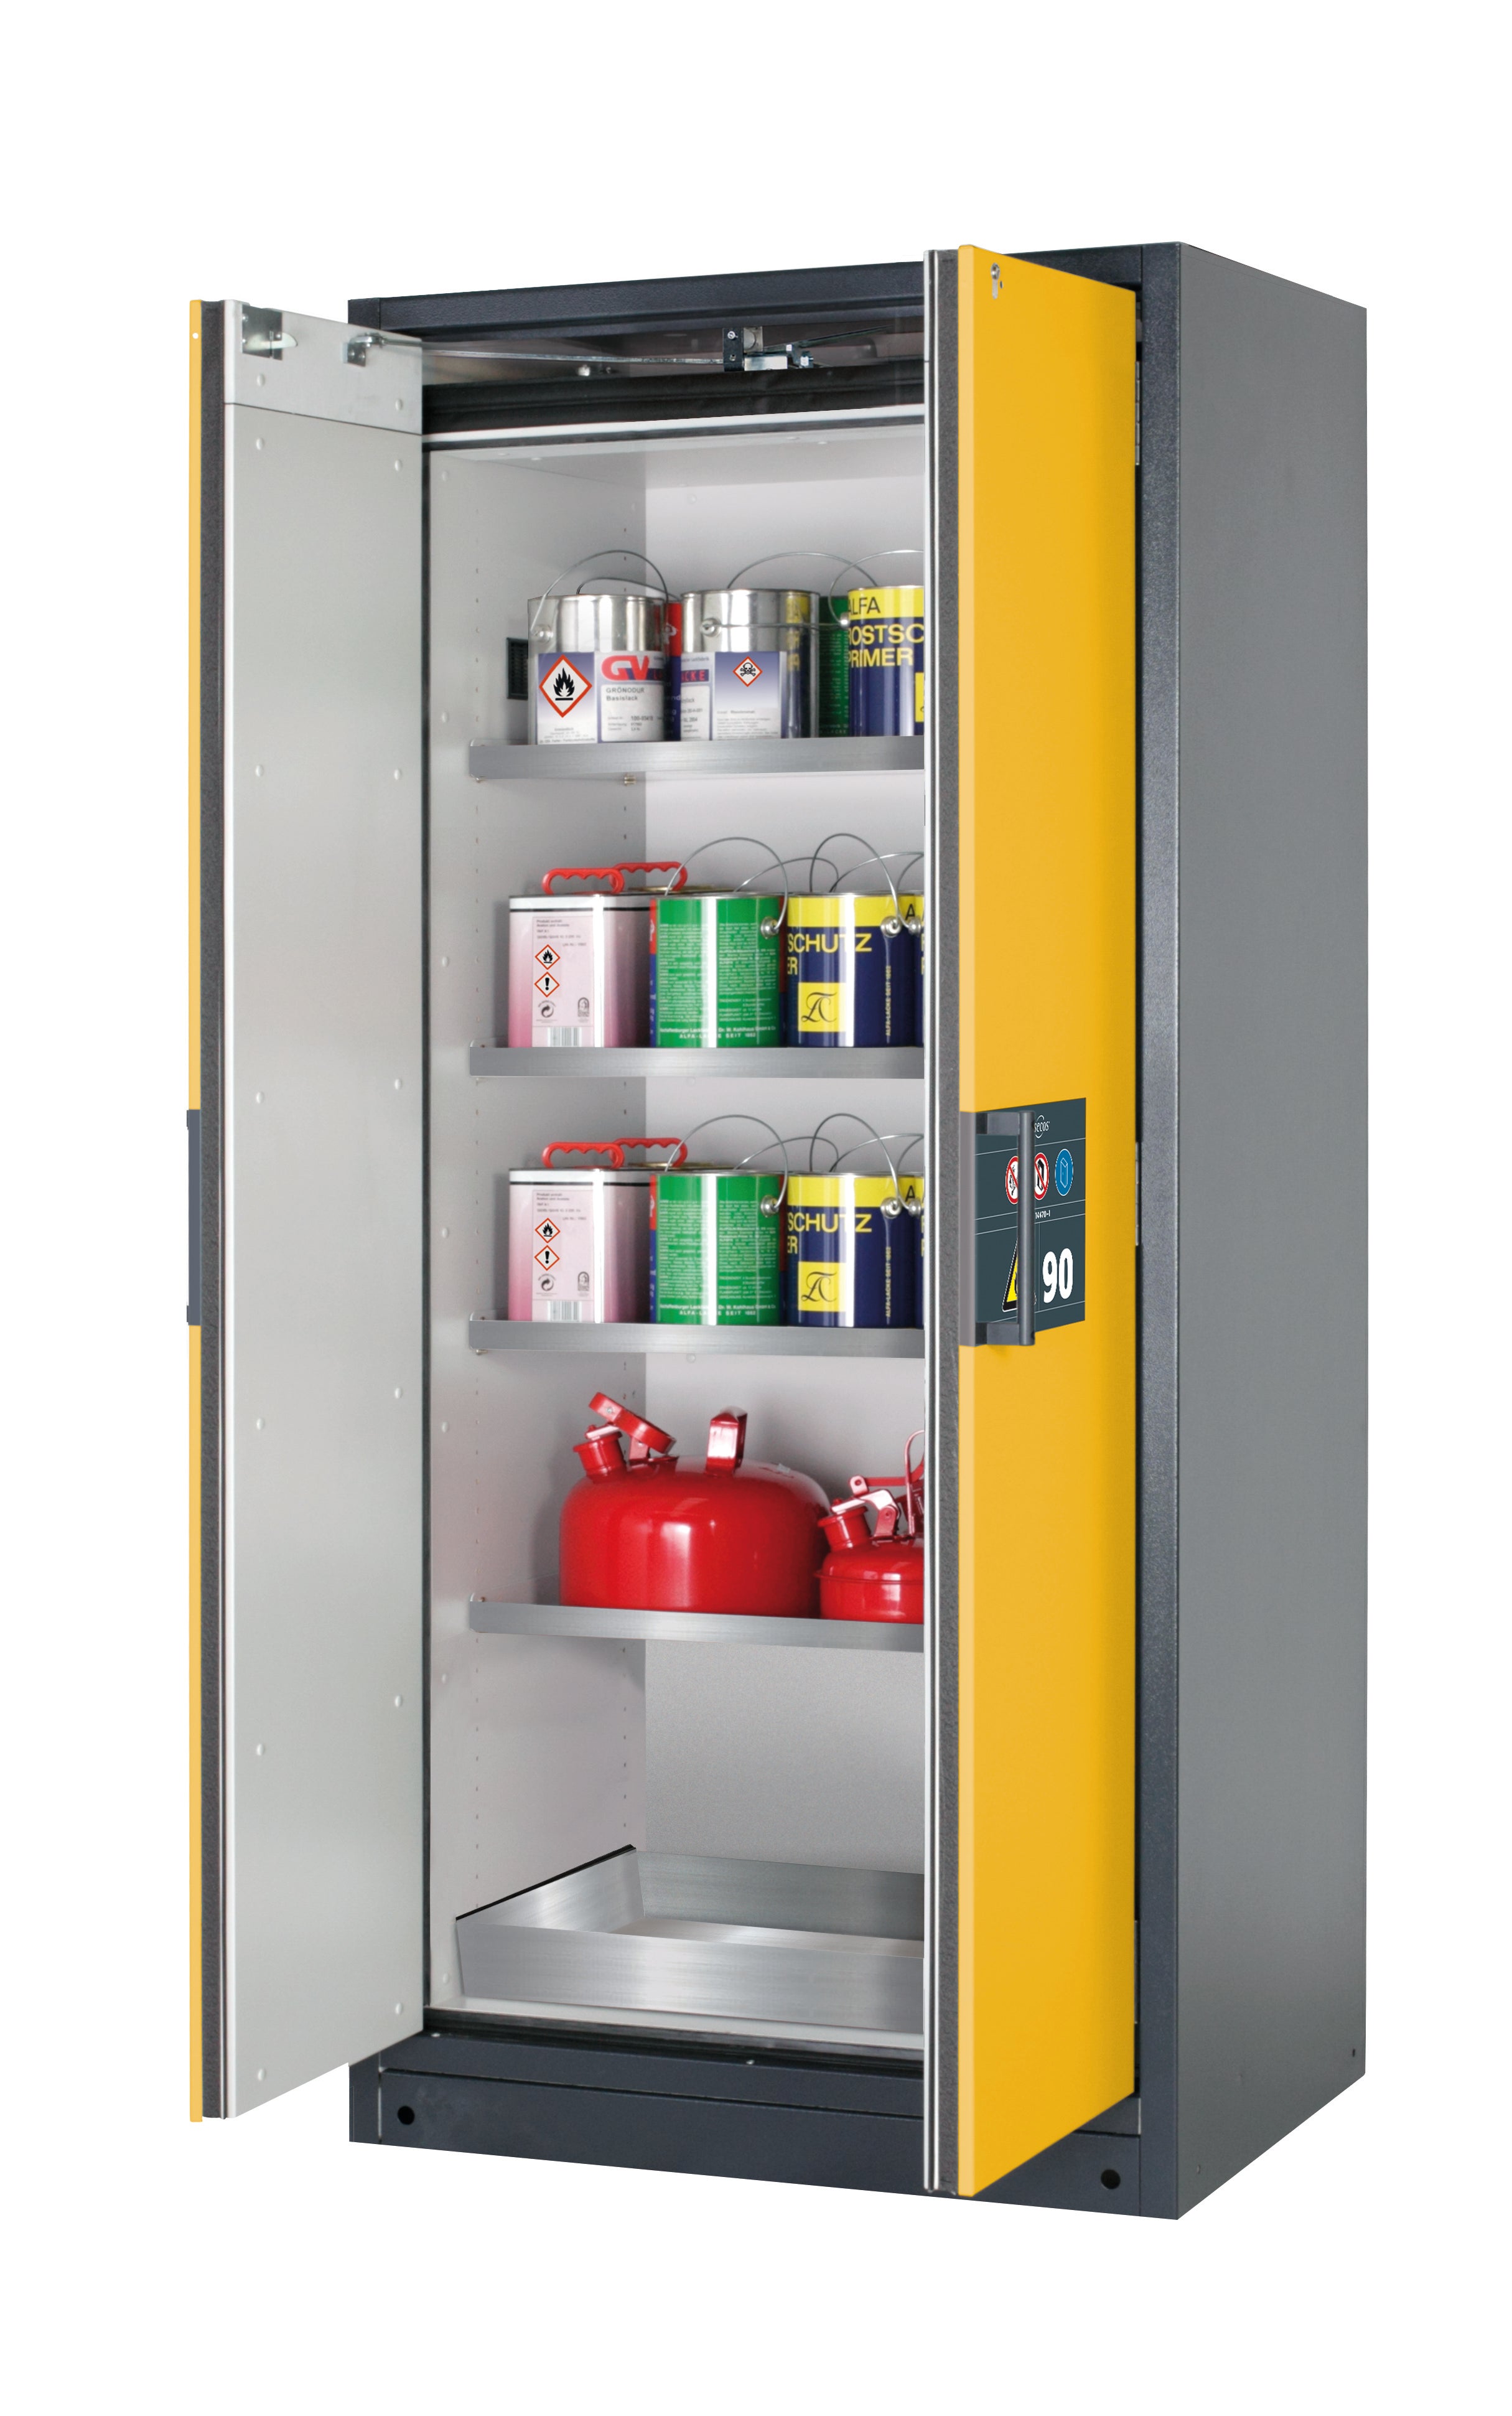 Type 90 safety storage cabinet Q-PEGASUS-90 model Q90.195.090.WDAC in warning yellow RAL 1004 with 4x shelf standard (stainless steel 1.4301),